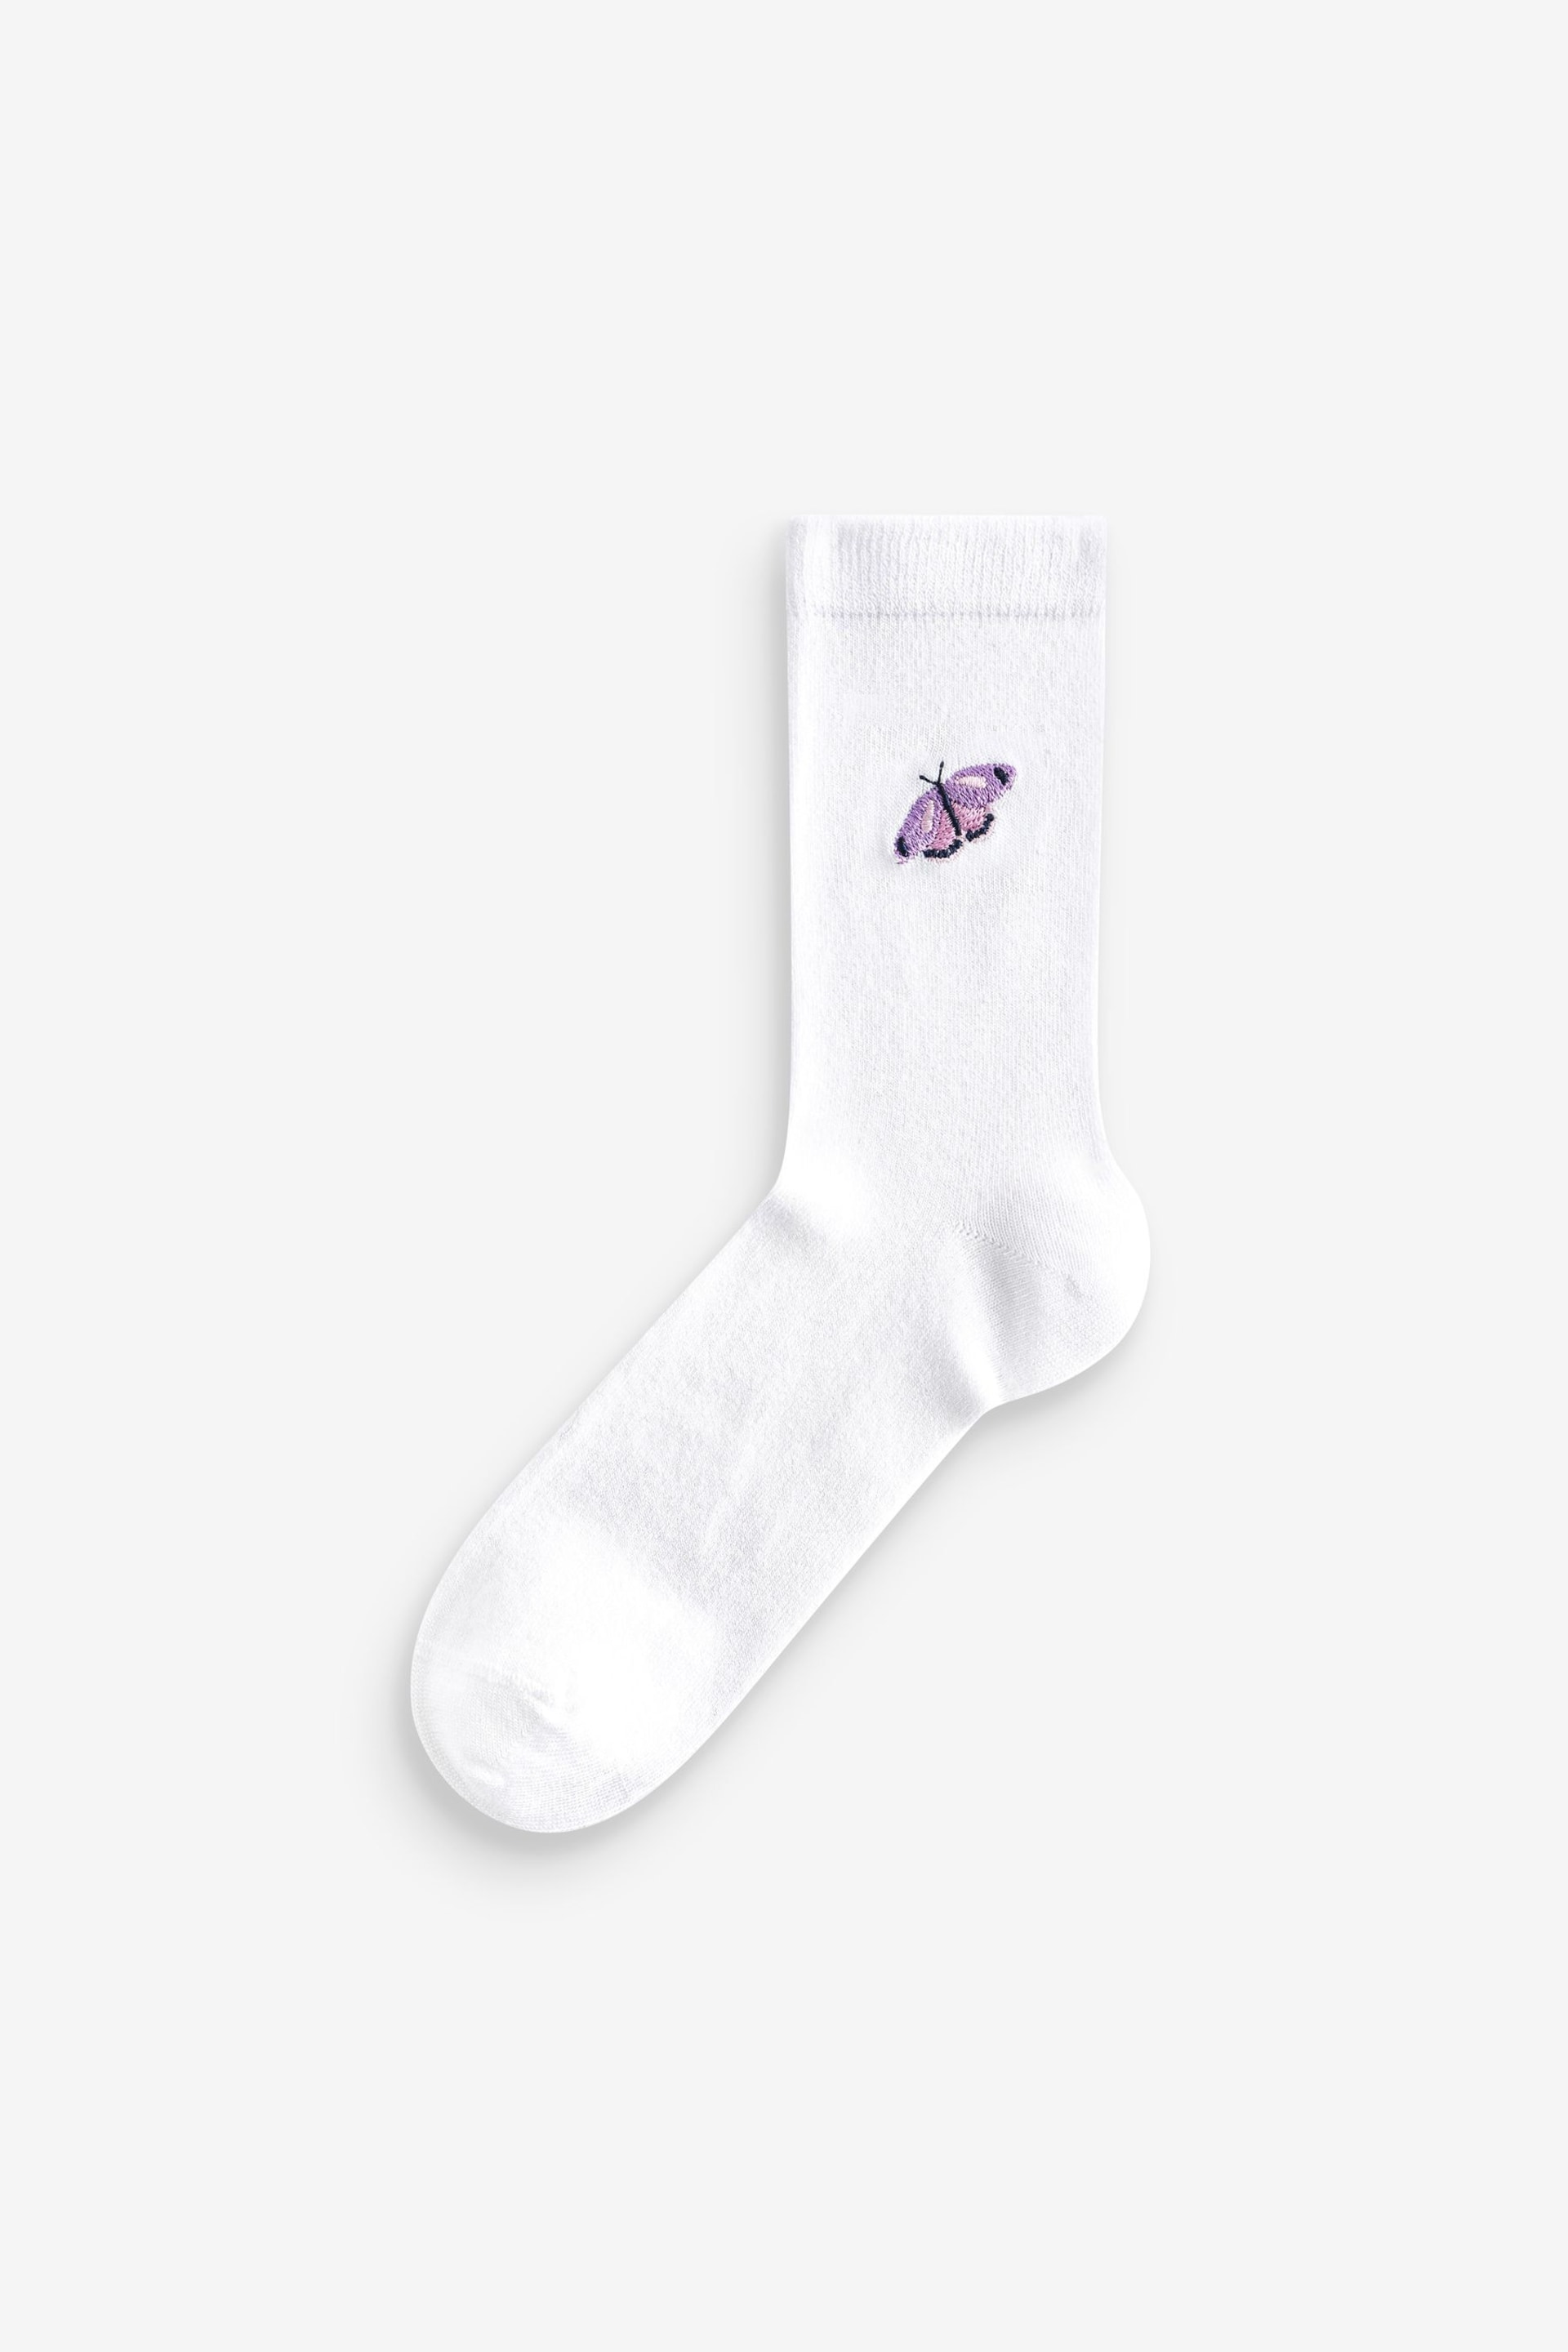 White Embroidered Motif Ankle Socks 4 Pack - Image 5 of 6